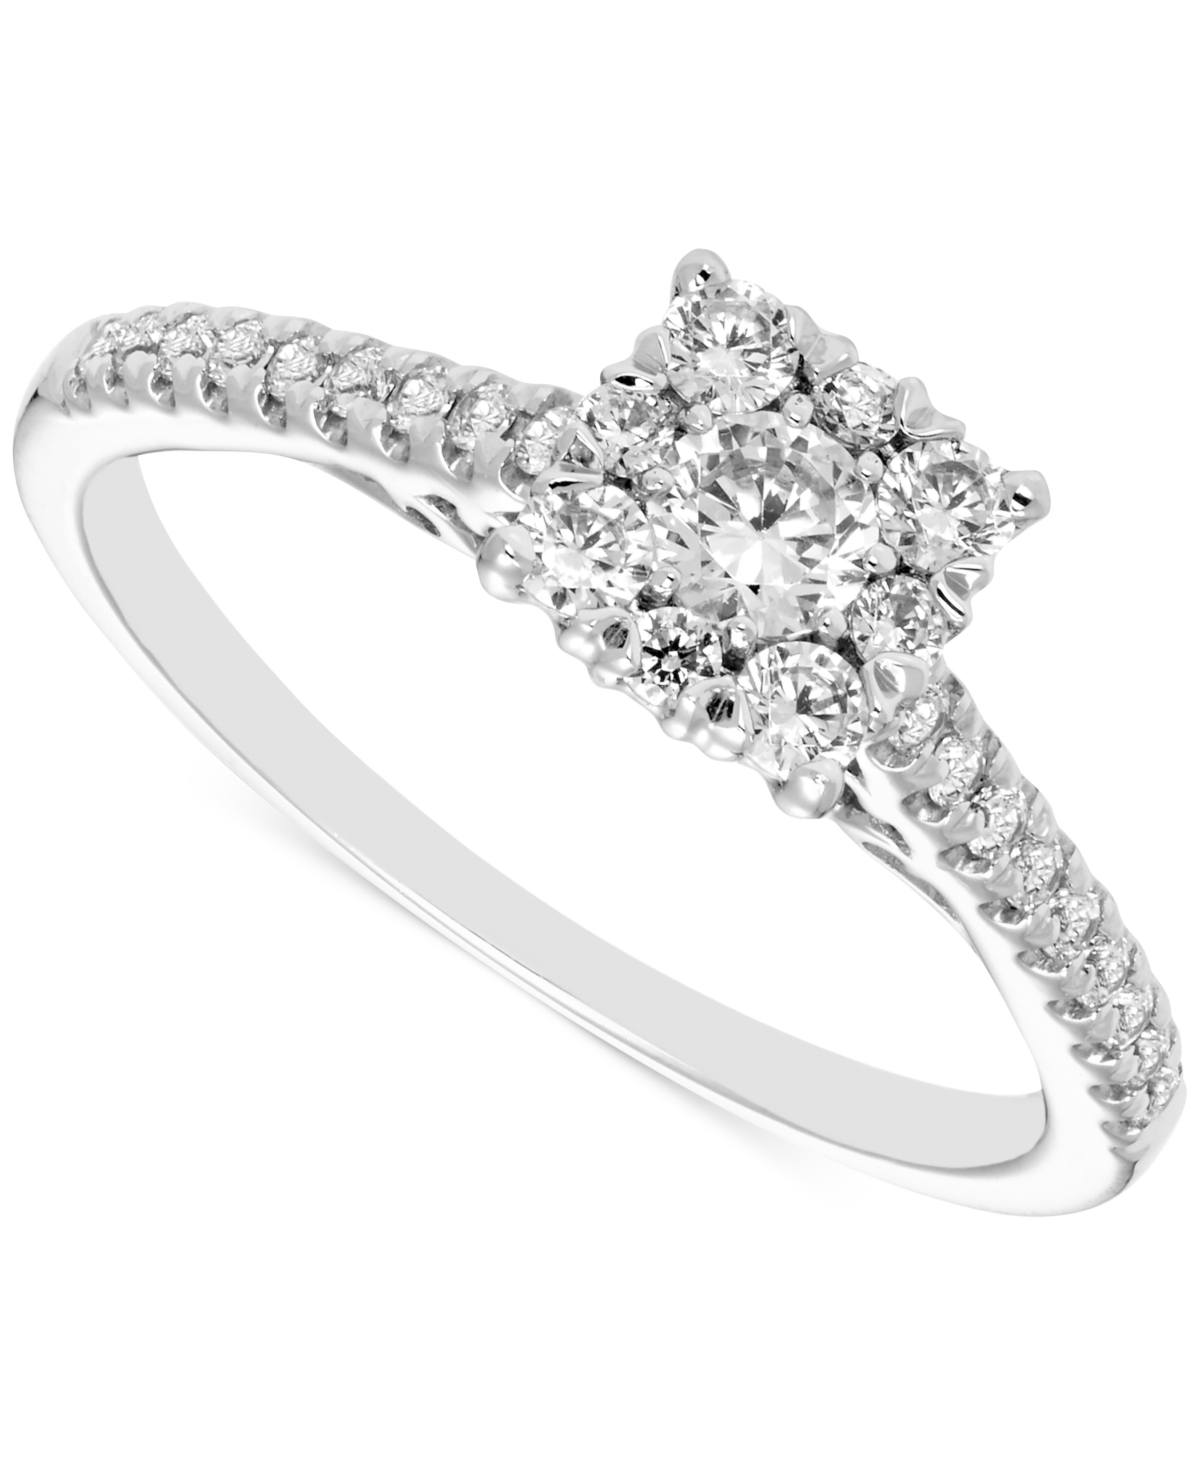 Diamond Square Halo Engagement Ring (1/2 ct. t.w.) in 14k White Gold - White Gold